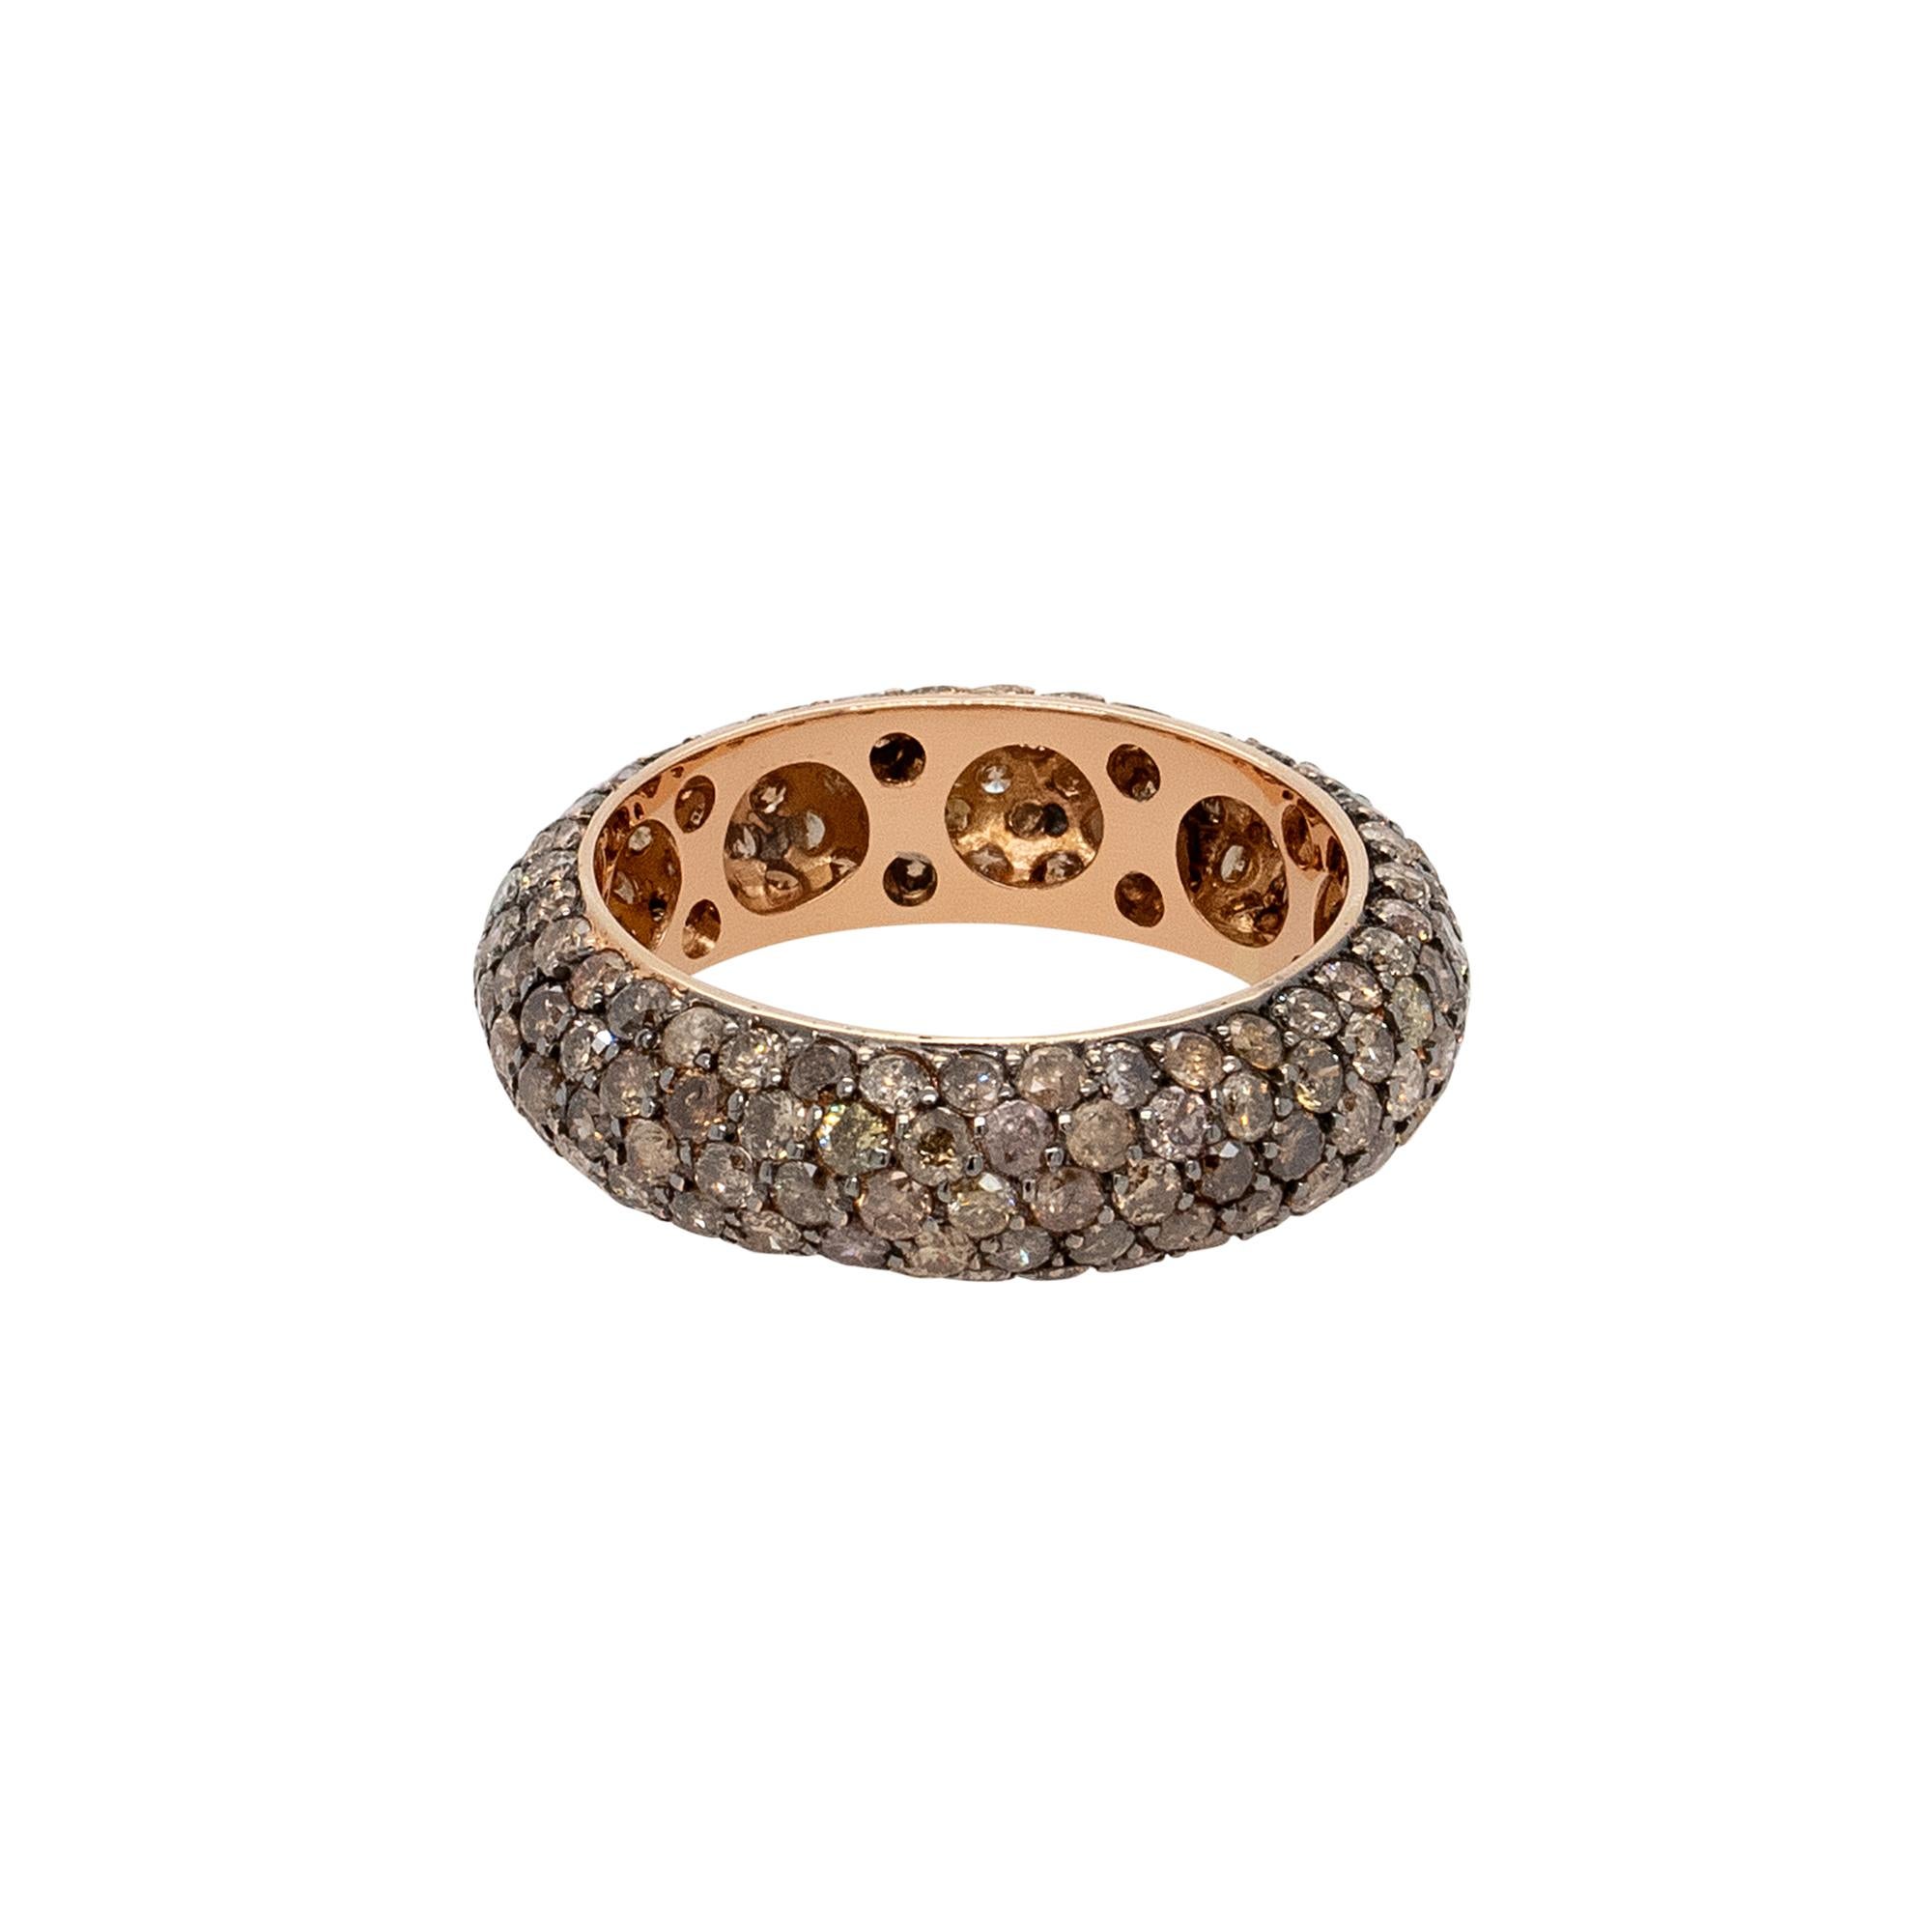 Diamond Details:
Approx 0.95ctw Round Brilliant
Multicolor and Multiple Clarities
Ring Material: 14k Rose Gold
Ring Size: 7.5 (can be sized)
Total Weight: 4.04g (2.59dwt)
This item comes with a presentation box!
SKU: R6318

Embrace the spectrum of